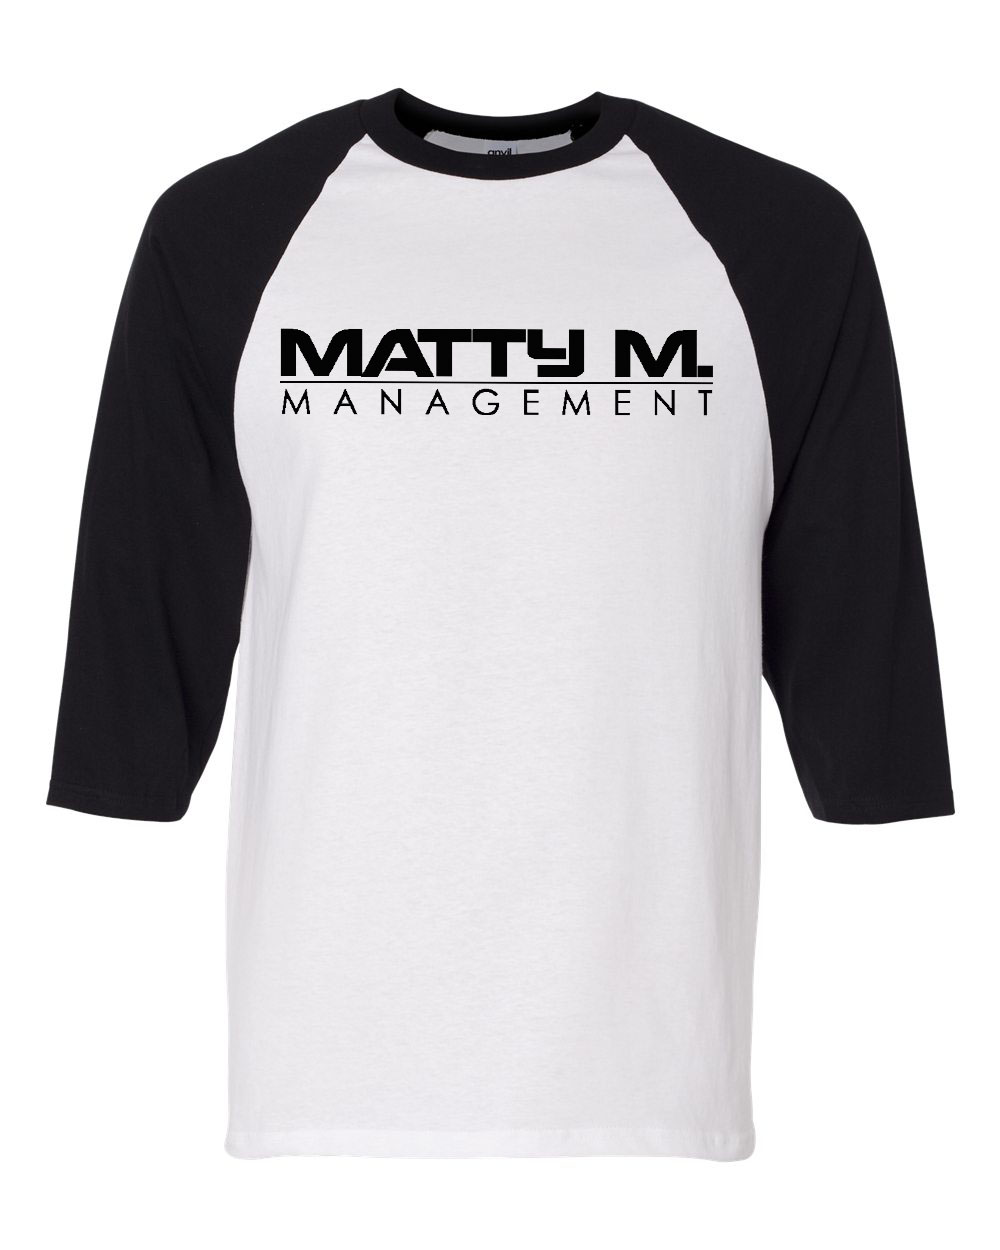 A white and black shirt with the words matty m management on it.